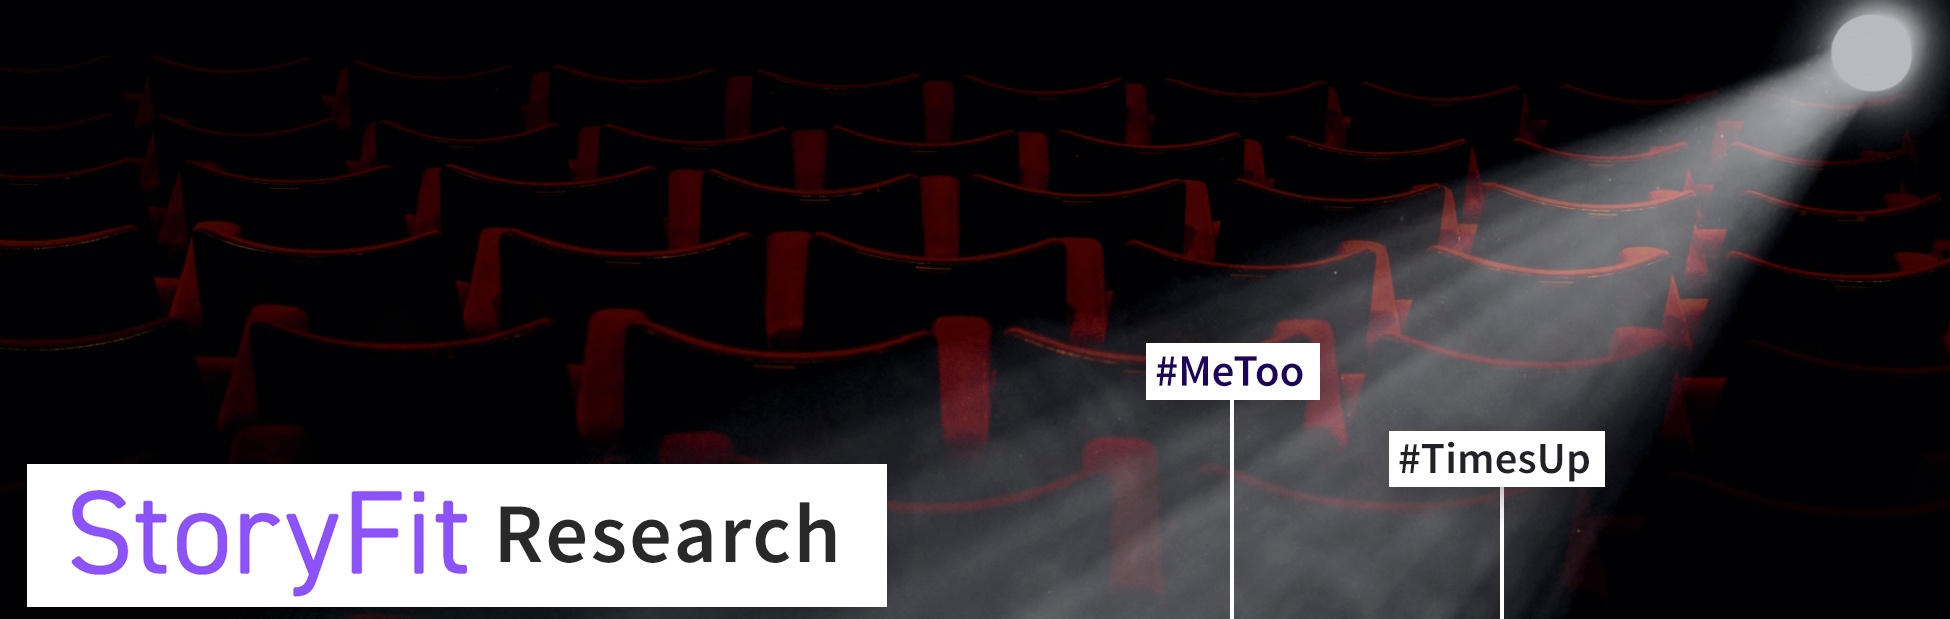 New Study: Did #MeToo and #TimesUp Impact Academy Choices?